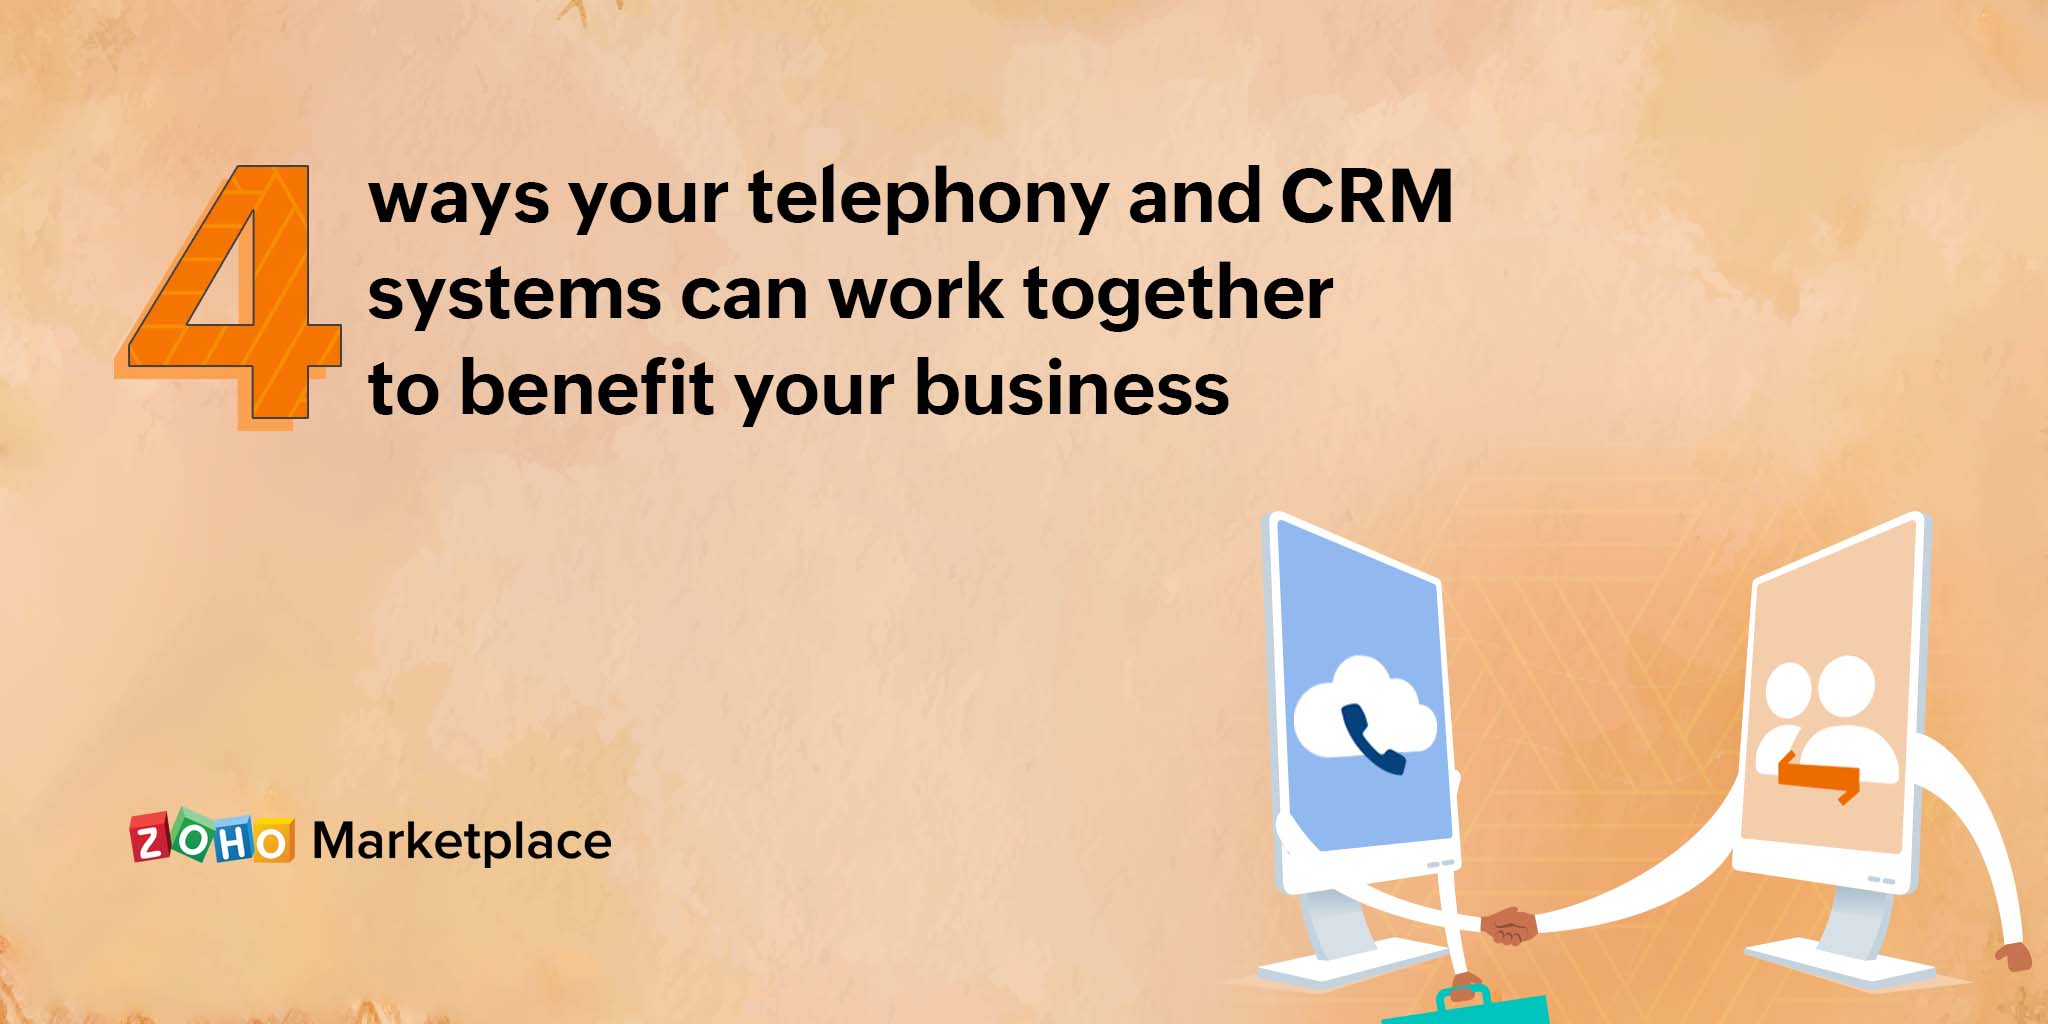 4 ways your telephony and CRM systems can work together to benefit your business